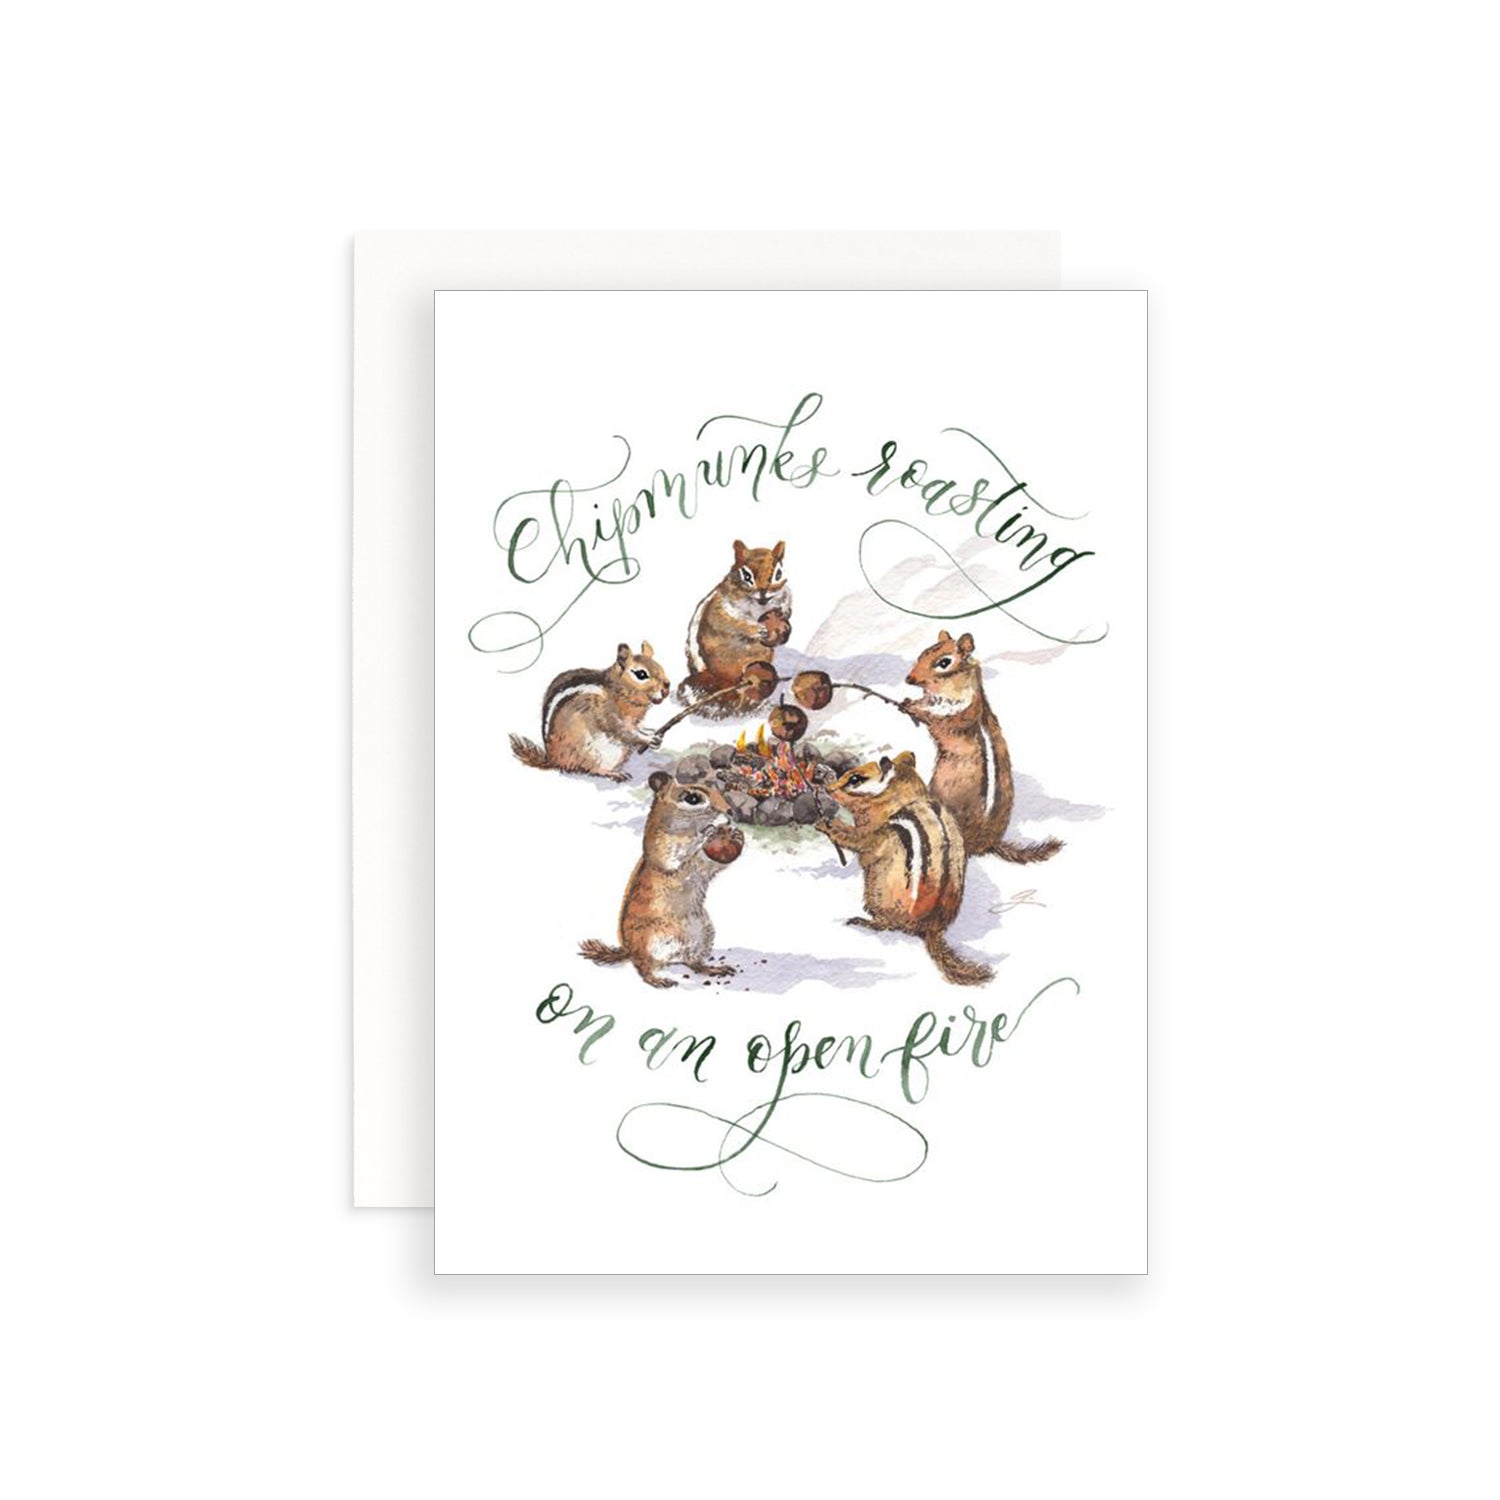 Chipmunks Roasting on an Open Fire Greeting Card | Father-Daughter Collaboration